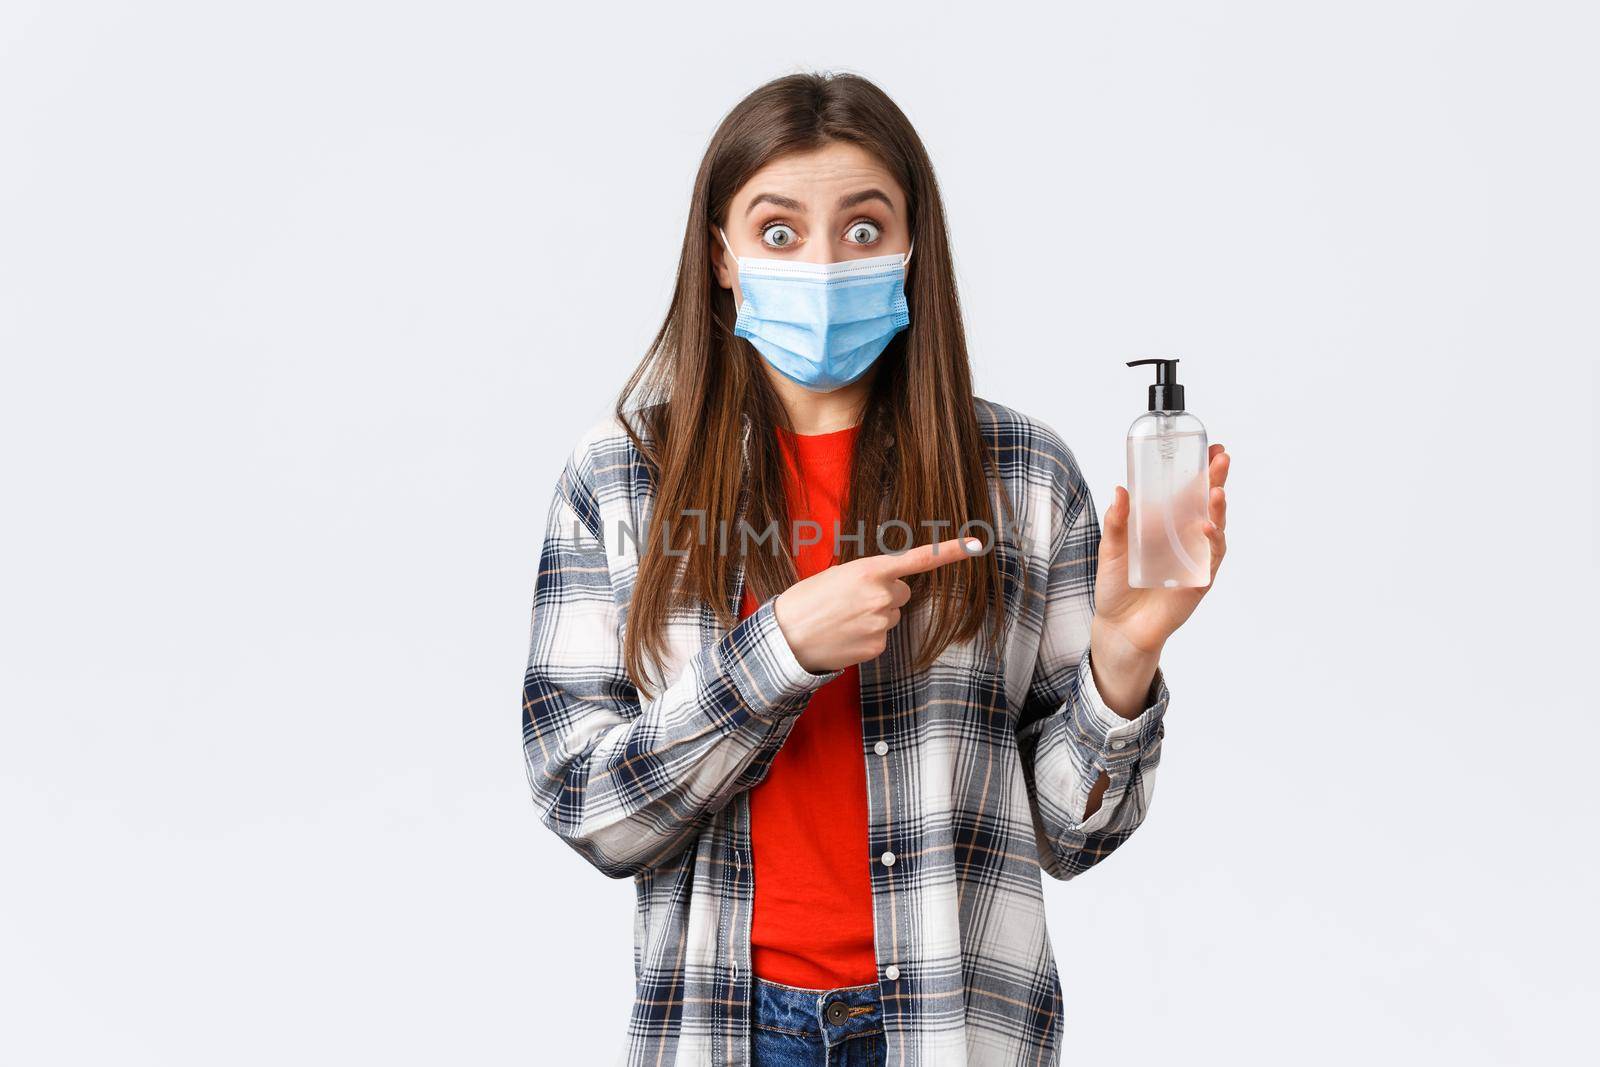 Coronavirus outbreak, leisure on quarantine, social distancing and emotions concept. Excited and astonished young woman in medical mask, pointing at hand sanitizer, recommend product.